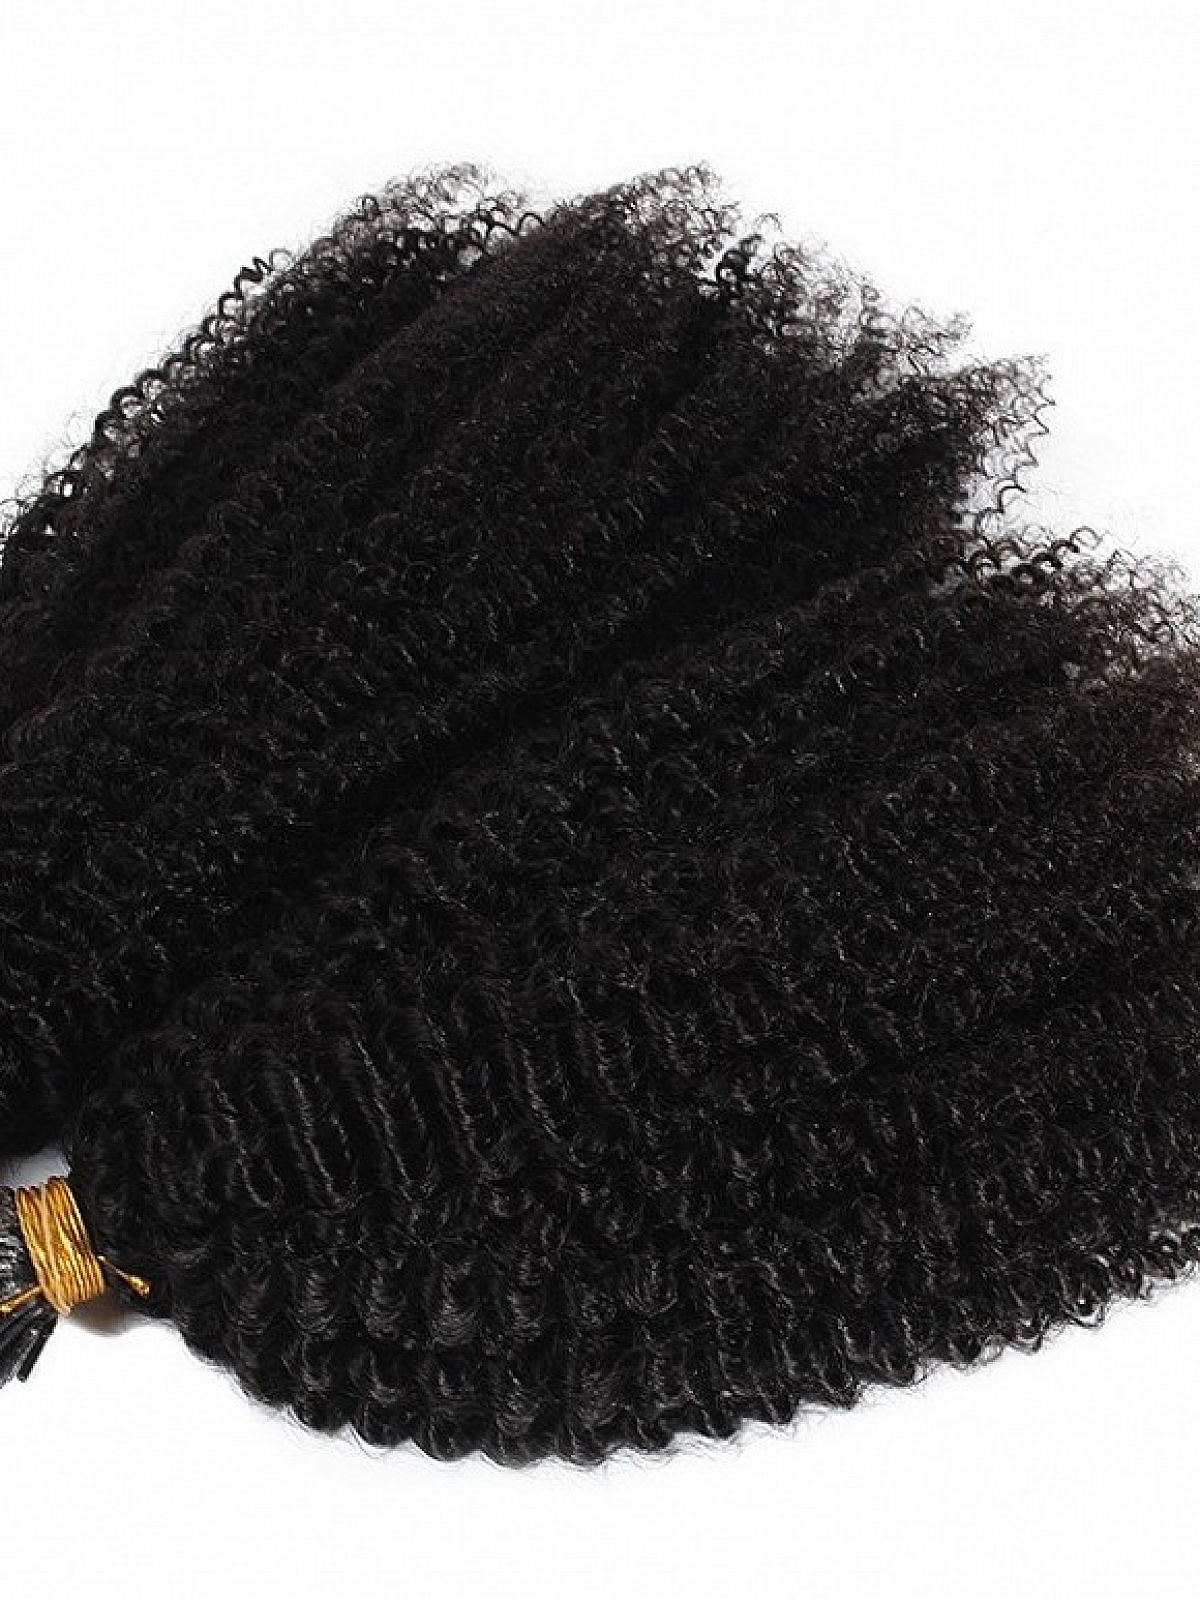 Microlinks - Kinky Curly Beads Weft / Itips Hair Extensions - Home ...